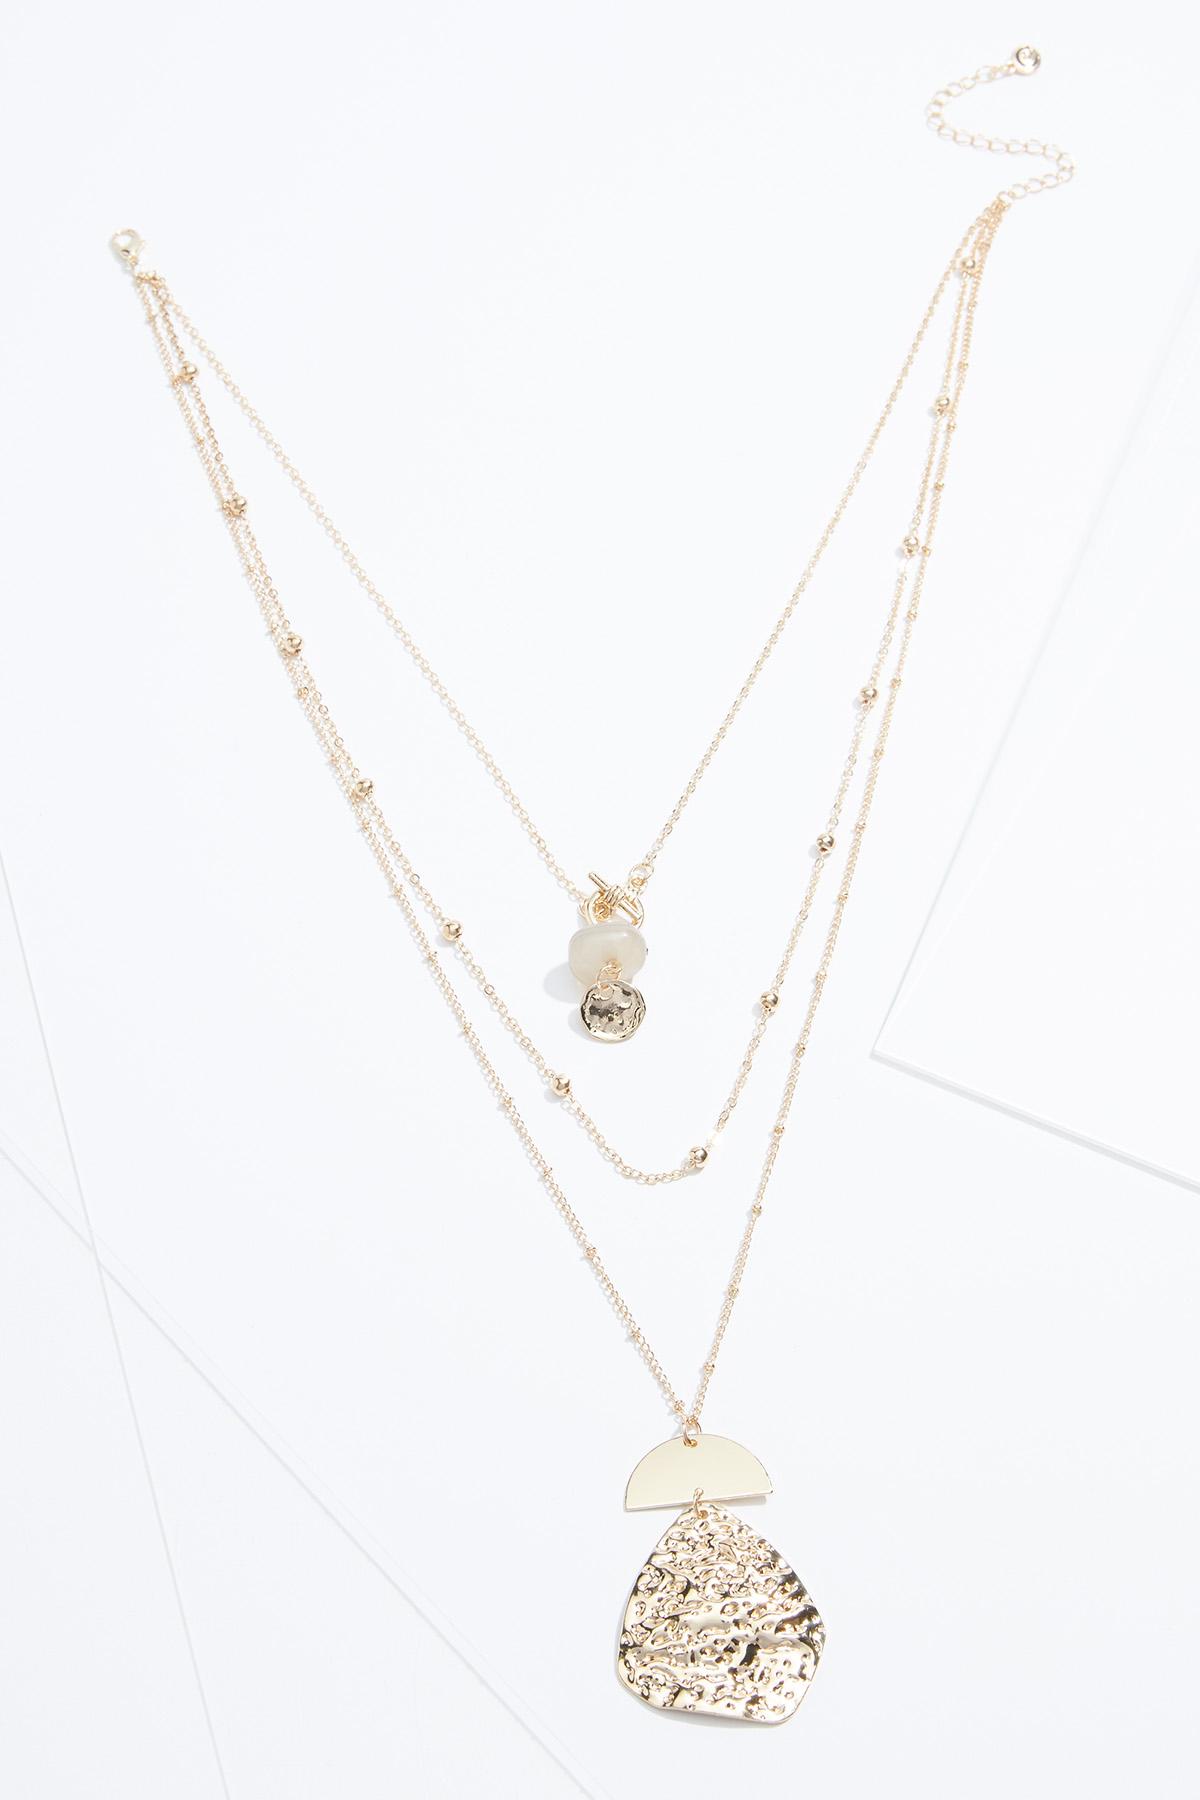 Delicate Layered Metal Necklace